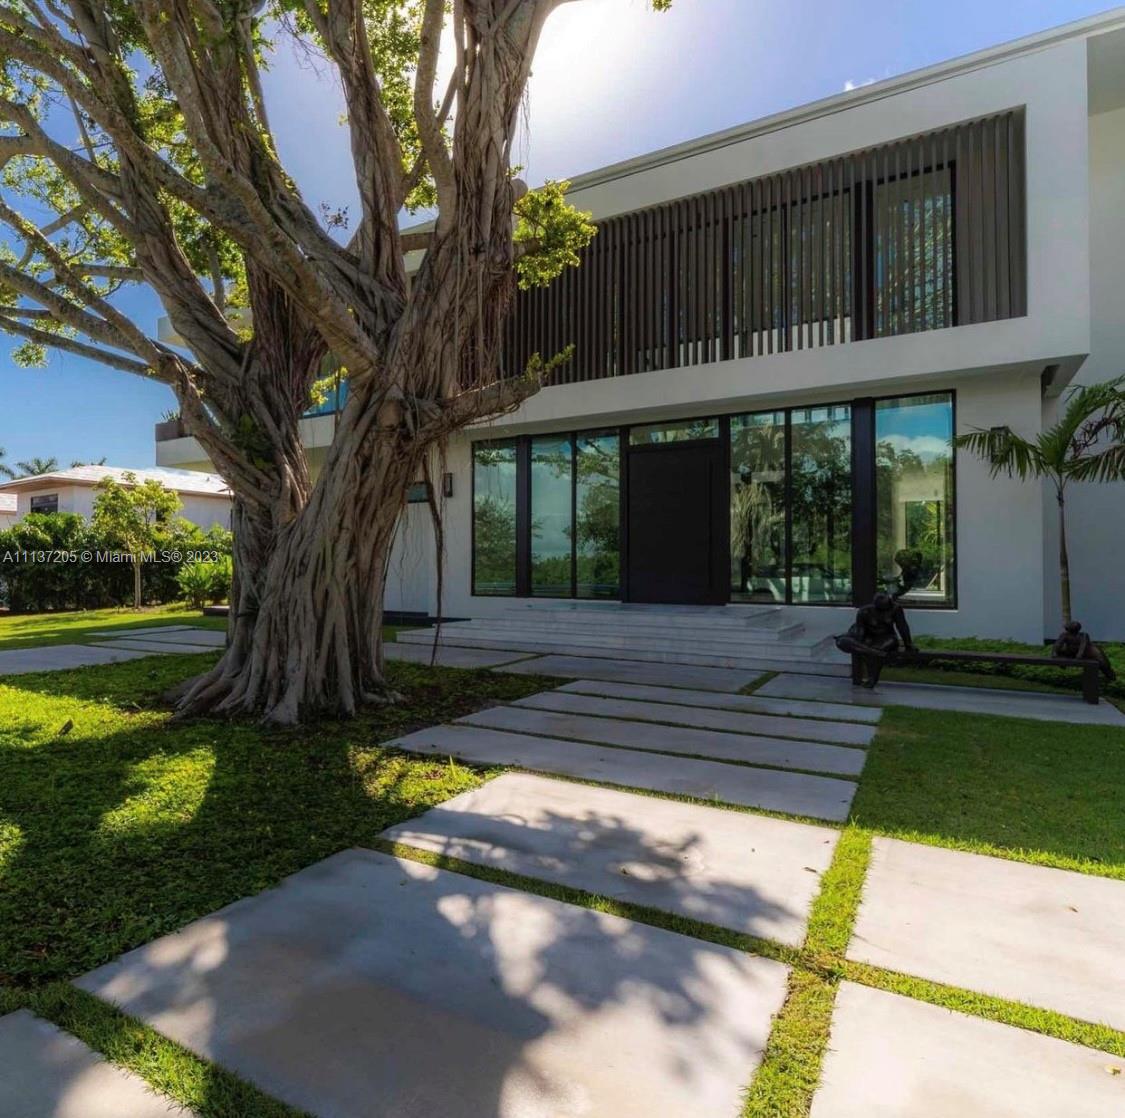 2018 New Construction built and designed modern Marvel by Hugo Mijares, G3C in conjunction with Lucrecia Lindemann Luxury...Located in the one and only coveted "Gables Estates". Water view on both sides of estate. Boasts 12,292 interior space on a acre plus lot. No detail spared. 8 Bd/ 7 Bth 1 Half bath  12,437 SqFt Liv Area,15,073 Adj Area SF,4 car garage 42k sqft Lot with water on both sides. NE Exposure.  A natural curtain of lush tropical trees surrounds the site, while its slightly slopping terrain offering an ideal location for the house itself inbetween a canal and a open bay .Retractable glass panels on the pool-facing side dramatically open up the house to the outside, while also being mindful of the need for privacy.Series of Courtyards brings lights&vegetation inside the house.